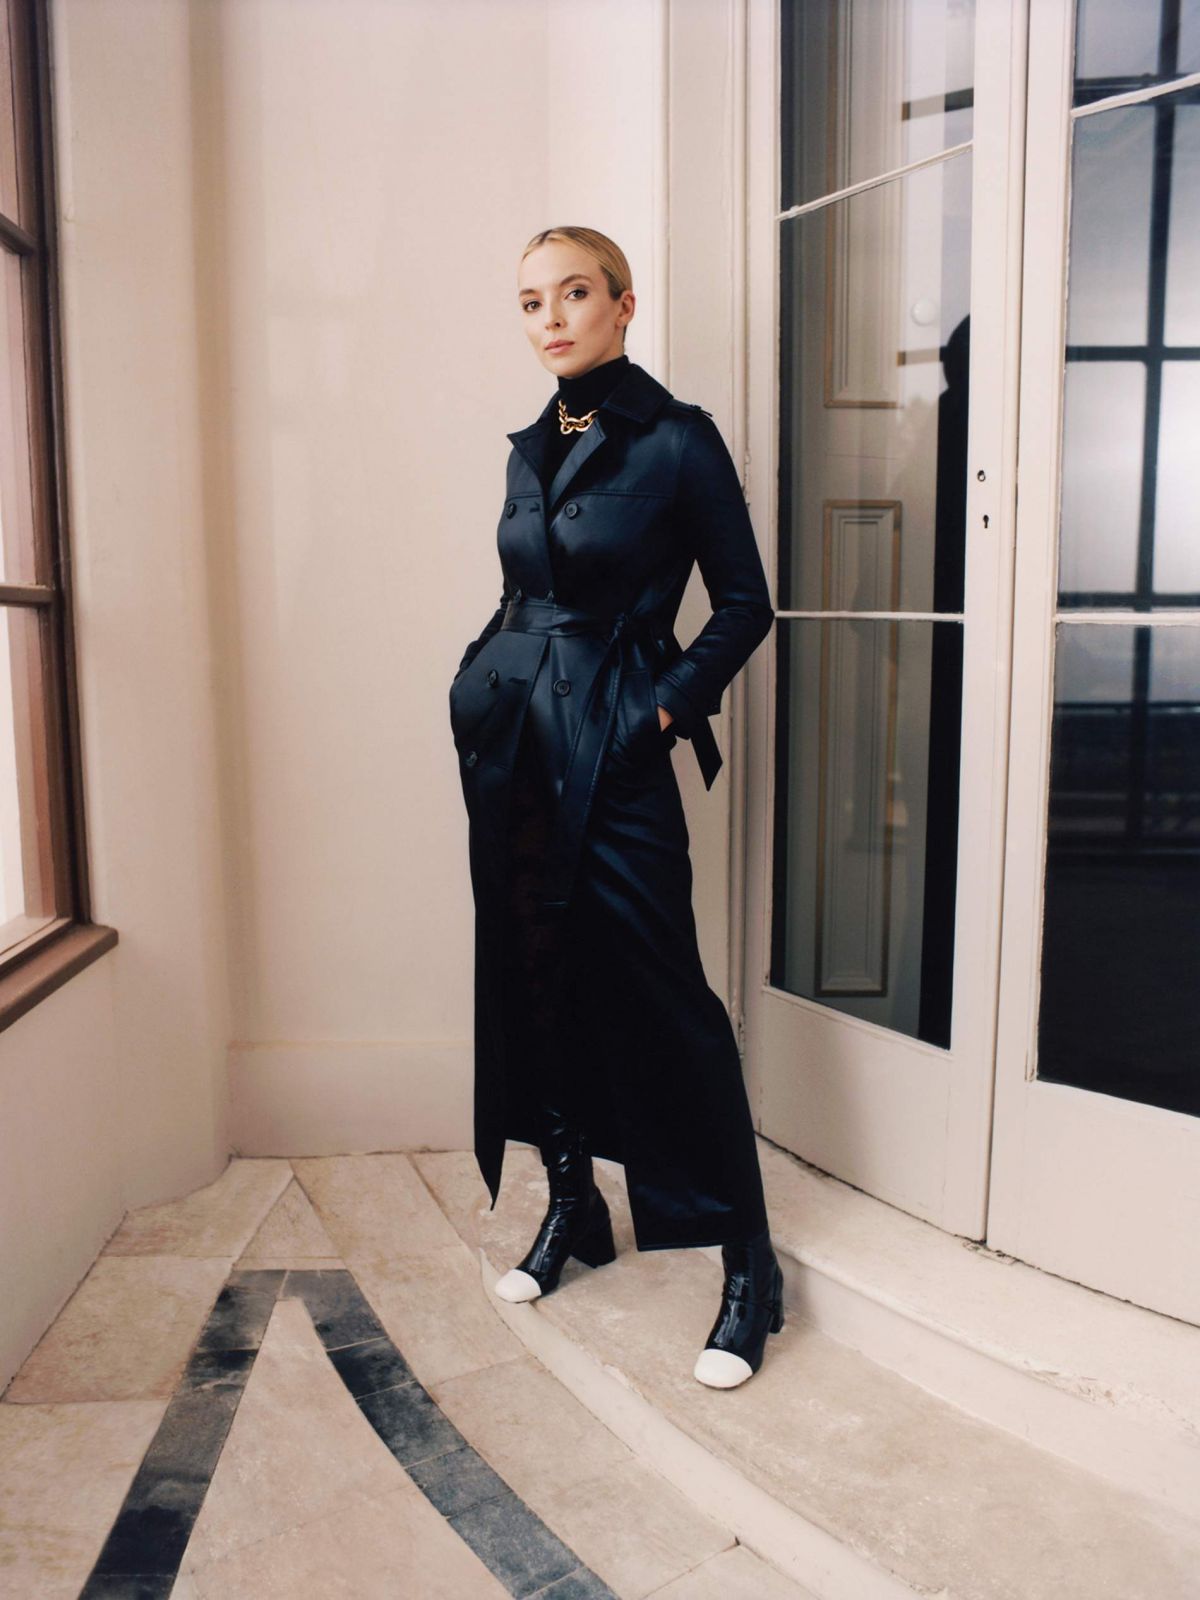 jodie-comer-for-the-edit-by-net-a-porter-november-2020-5.jpg